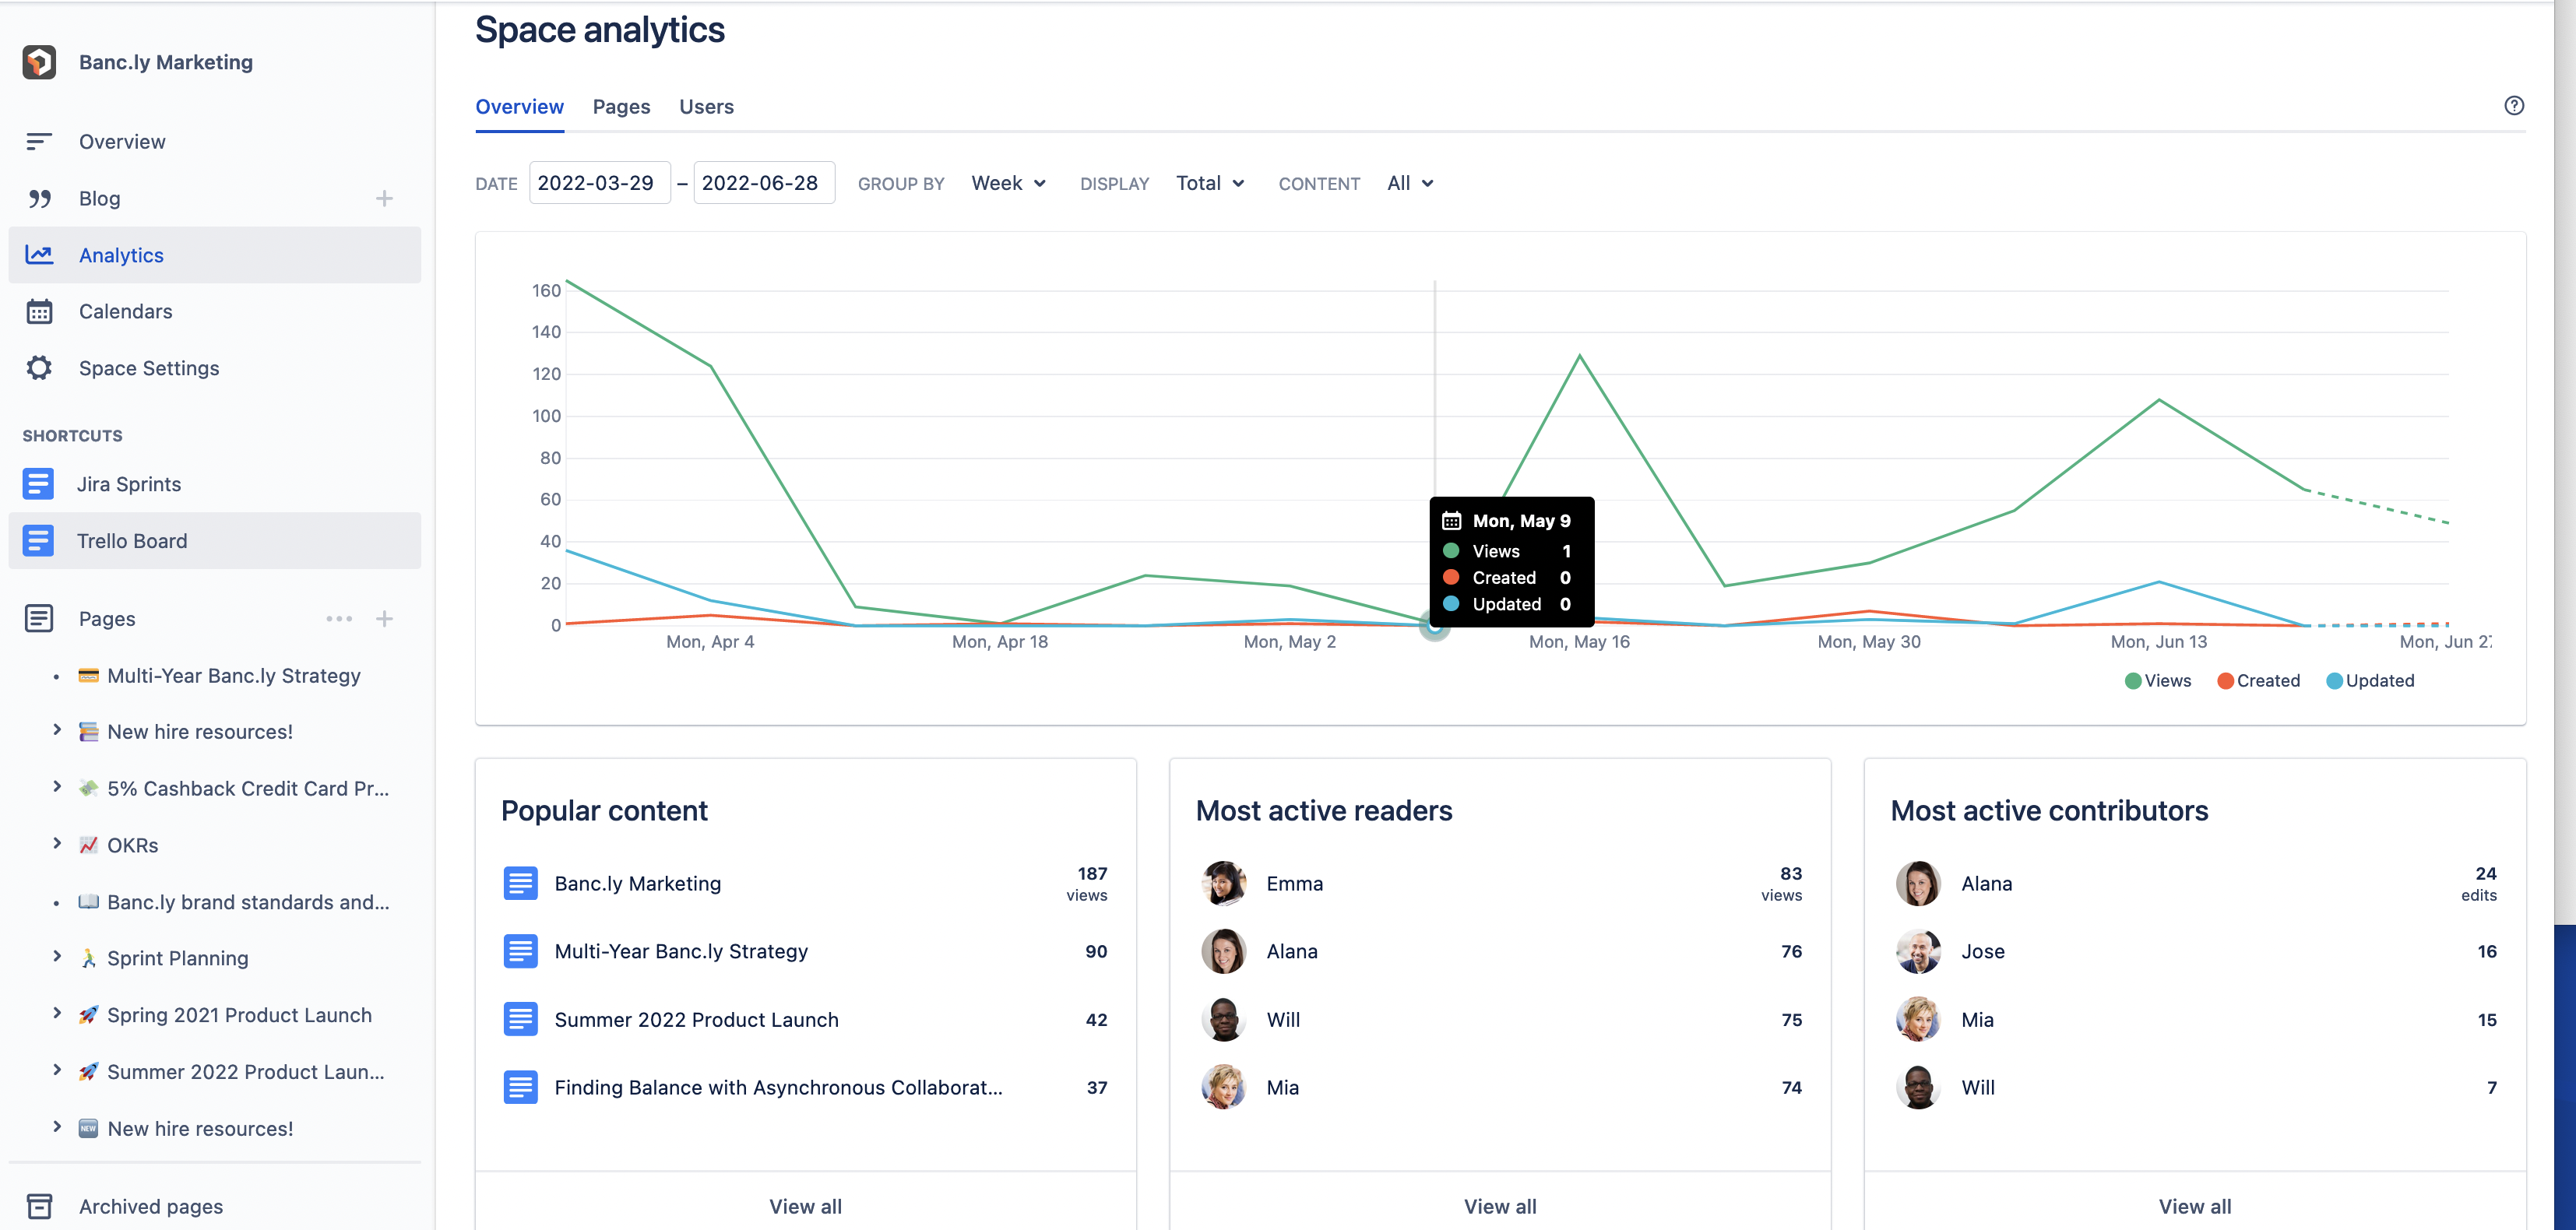 The overview page of Confluence space analytics